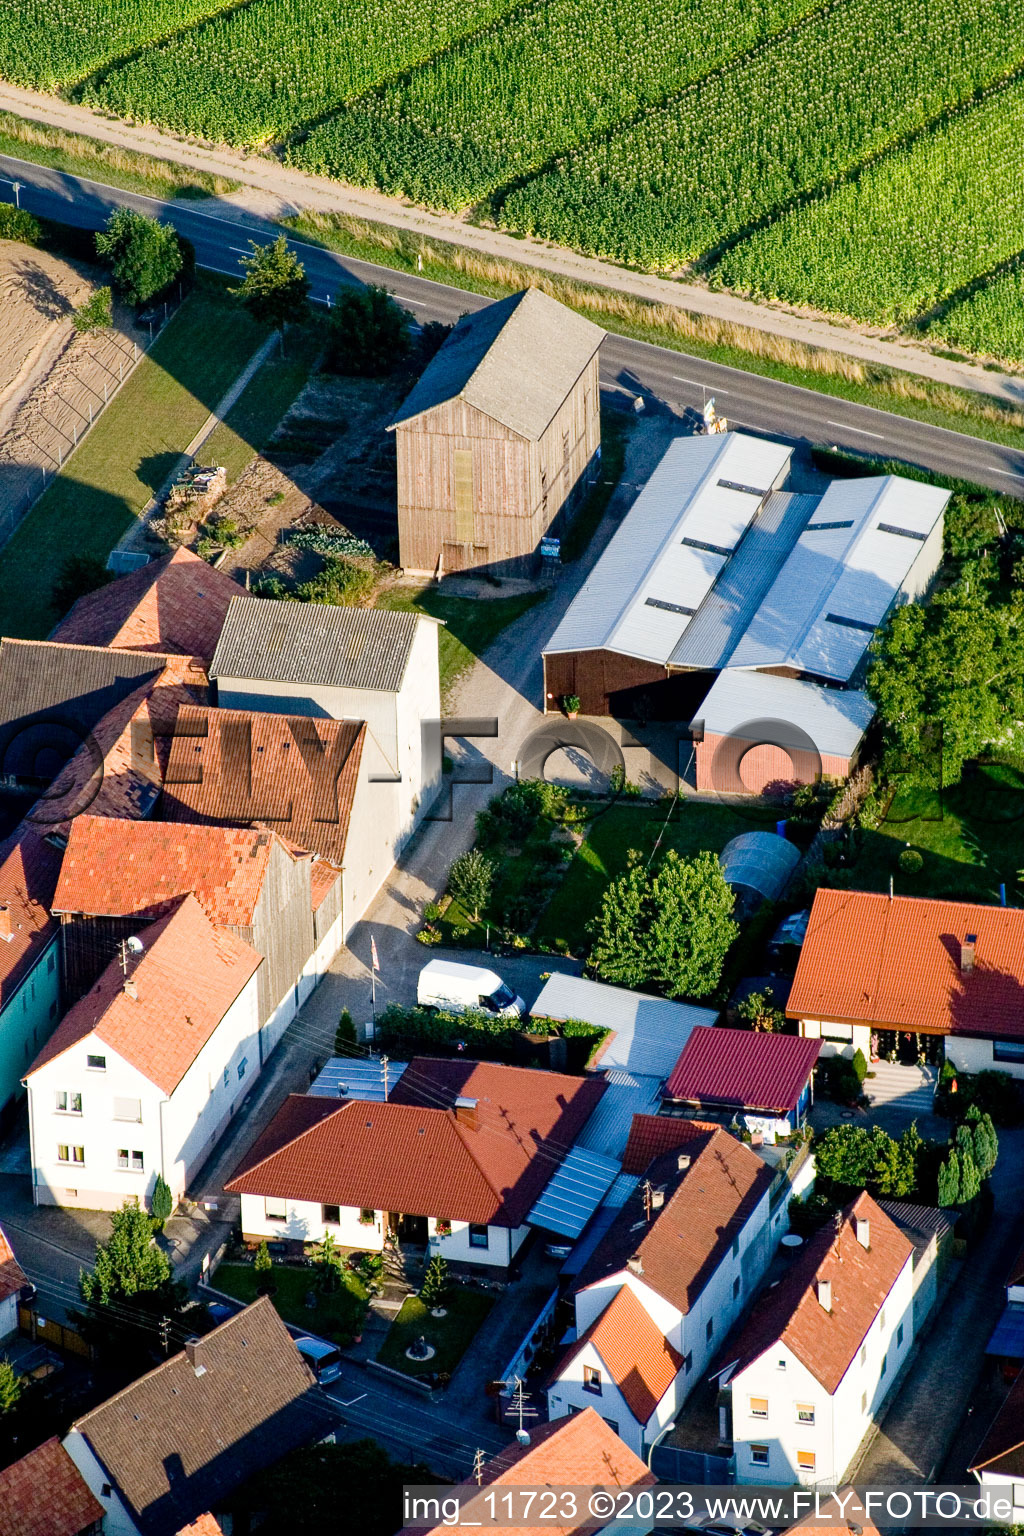 District Minderslachen in Kandel in the state Rhineland-Palatinate, Germany from a drone